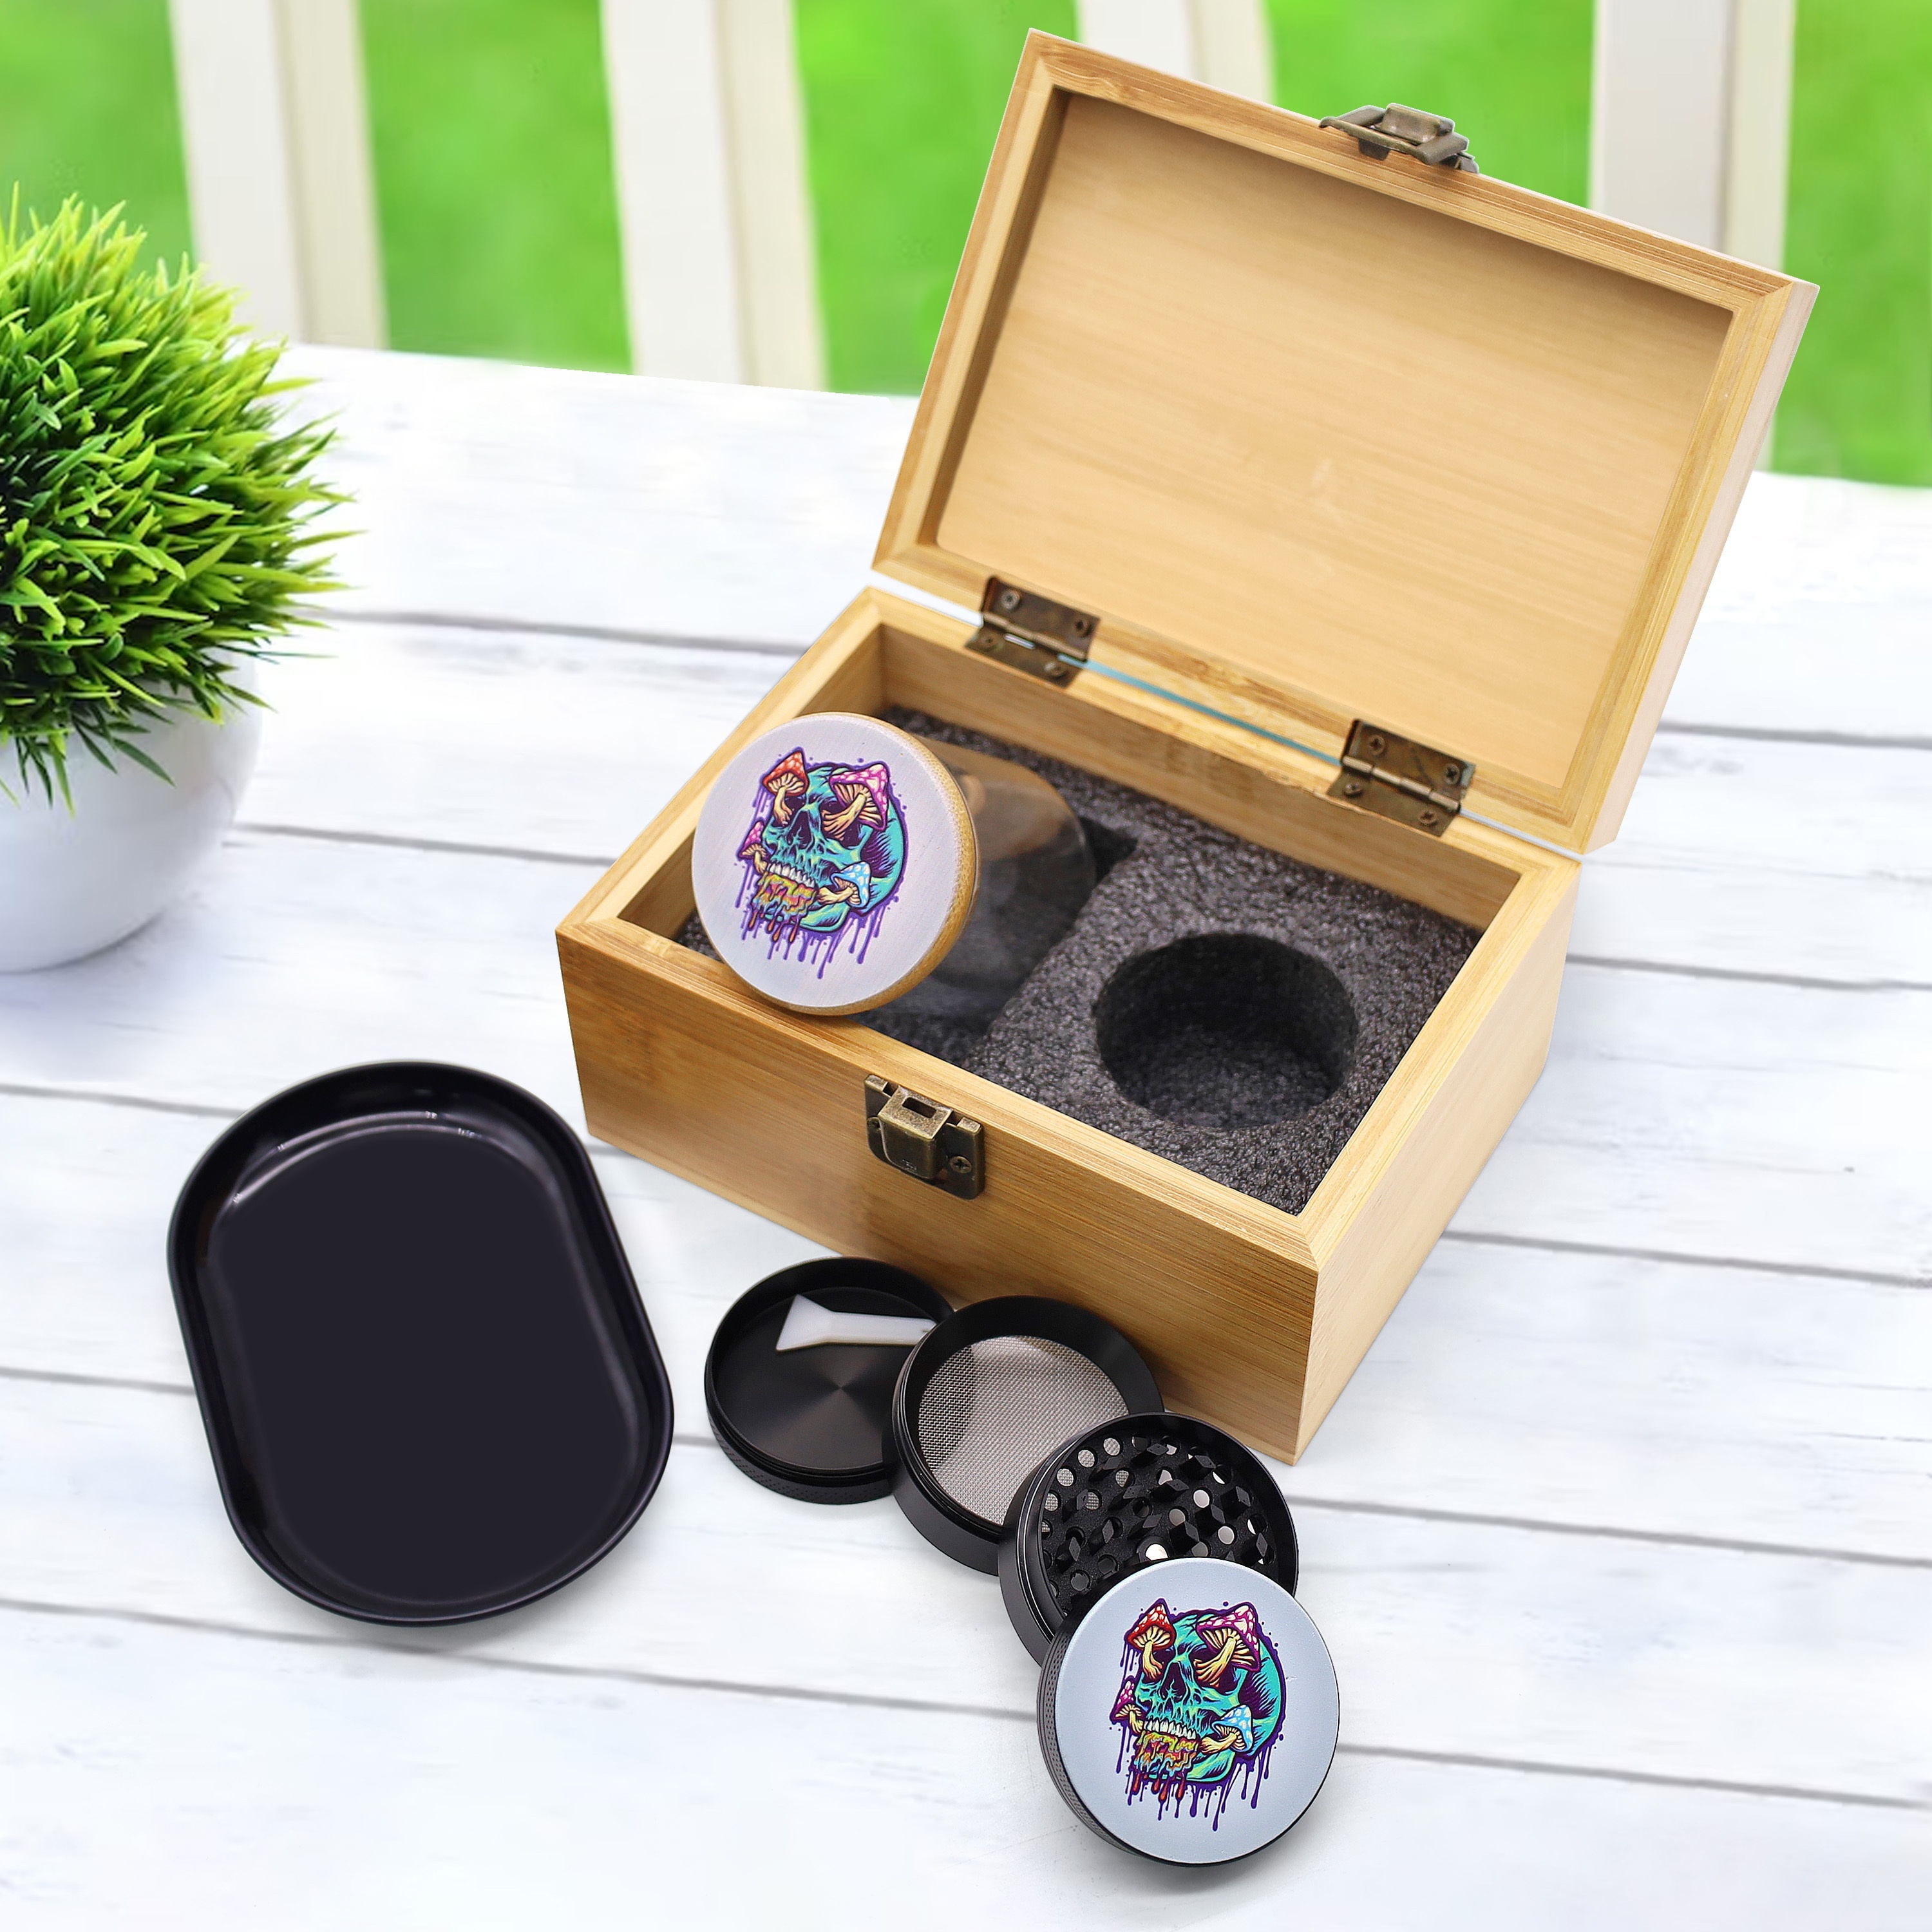 SKULL GLOW IN THE DARK TRAY SET WITH ROLLING TRAY, STORAGE CONTAINER AND  GRINDER (TRAYSET-GL02)